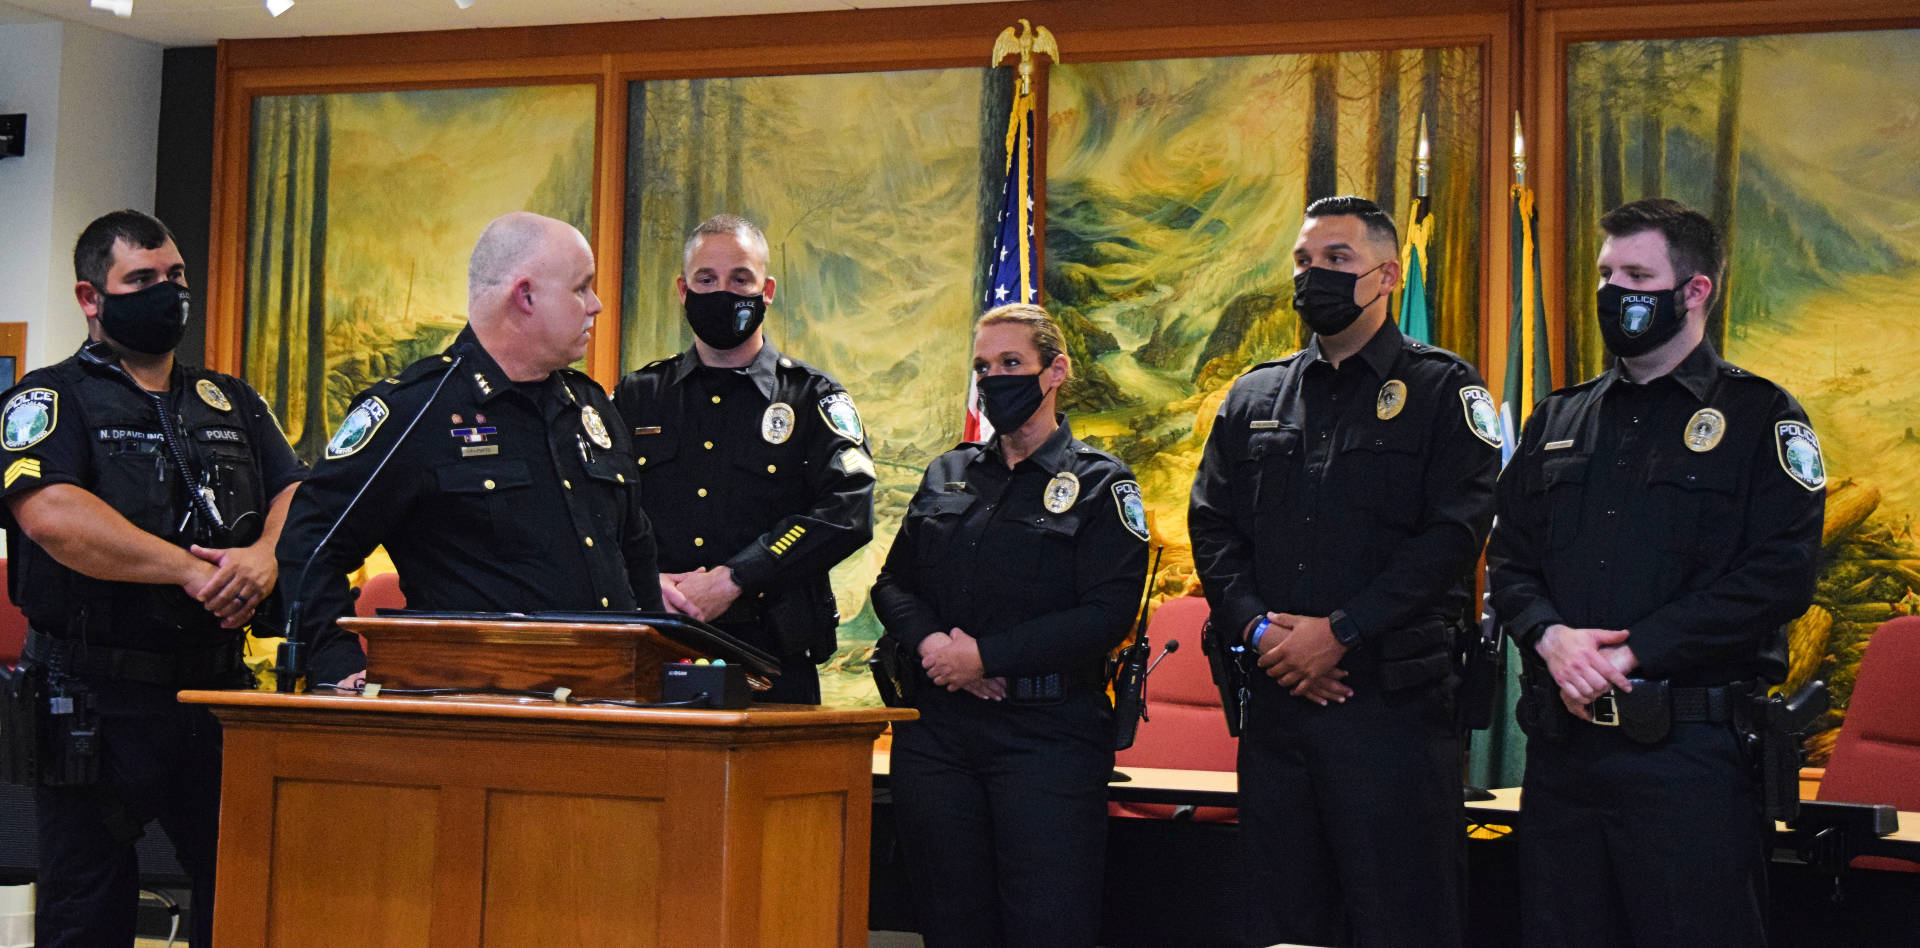 Photo by Conor Wilson/Valley Record
Police Chief Perry Phipps (center), speaks to new hires and promoted sergeants at the Oath of Office ceremony Aug. 9. Pictured left to right: Sgt. Nigel Draveling, Sgt. Jason Weiss. Officers: Pamela Mandery, Ricard Velasquez and James Aquirre.